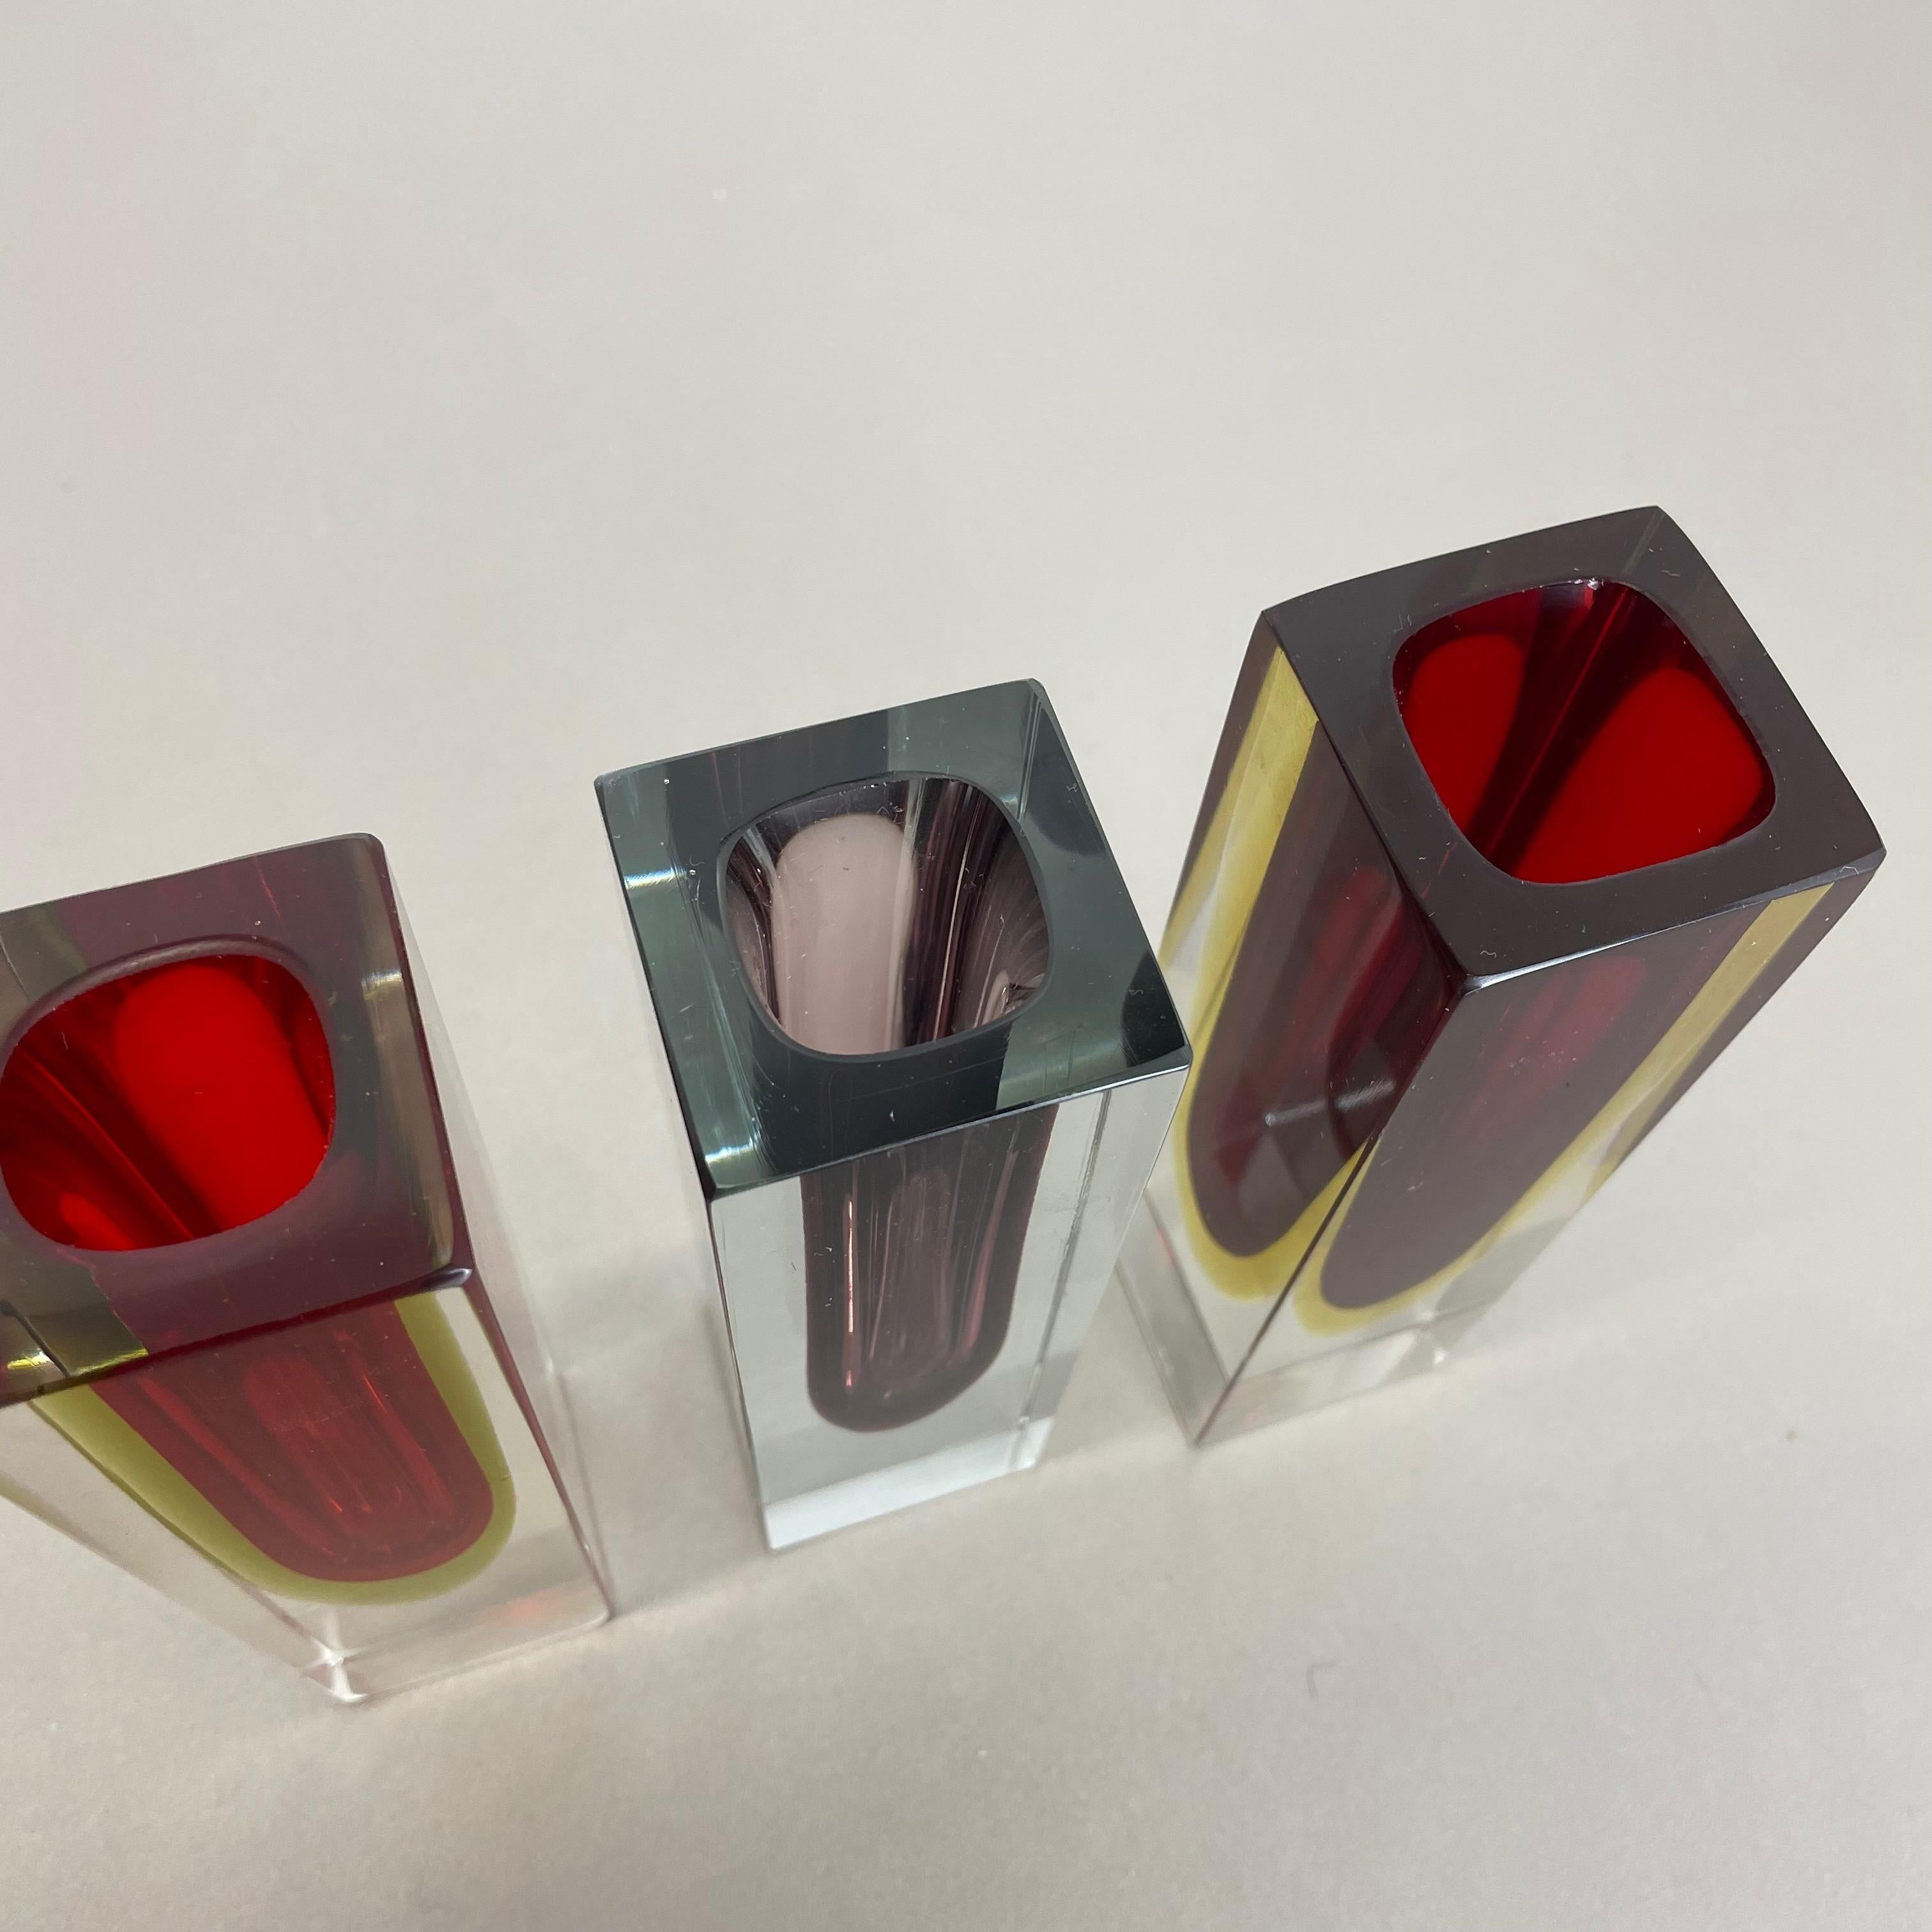 Rare Set of 3 Multicolor Faceted Murano Glass Sommerso Cube Vases, Italy, 1970s For Sale 6